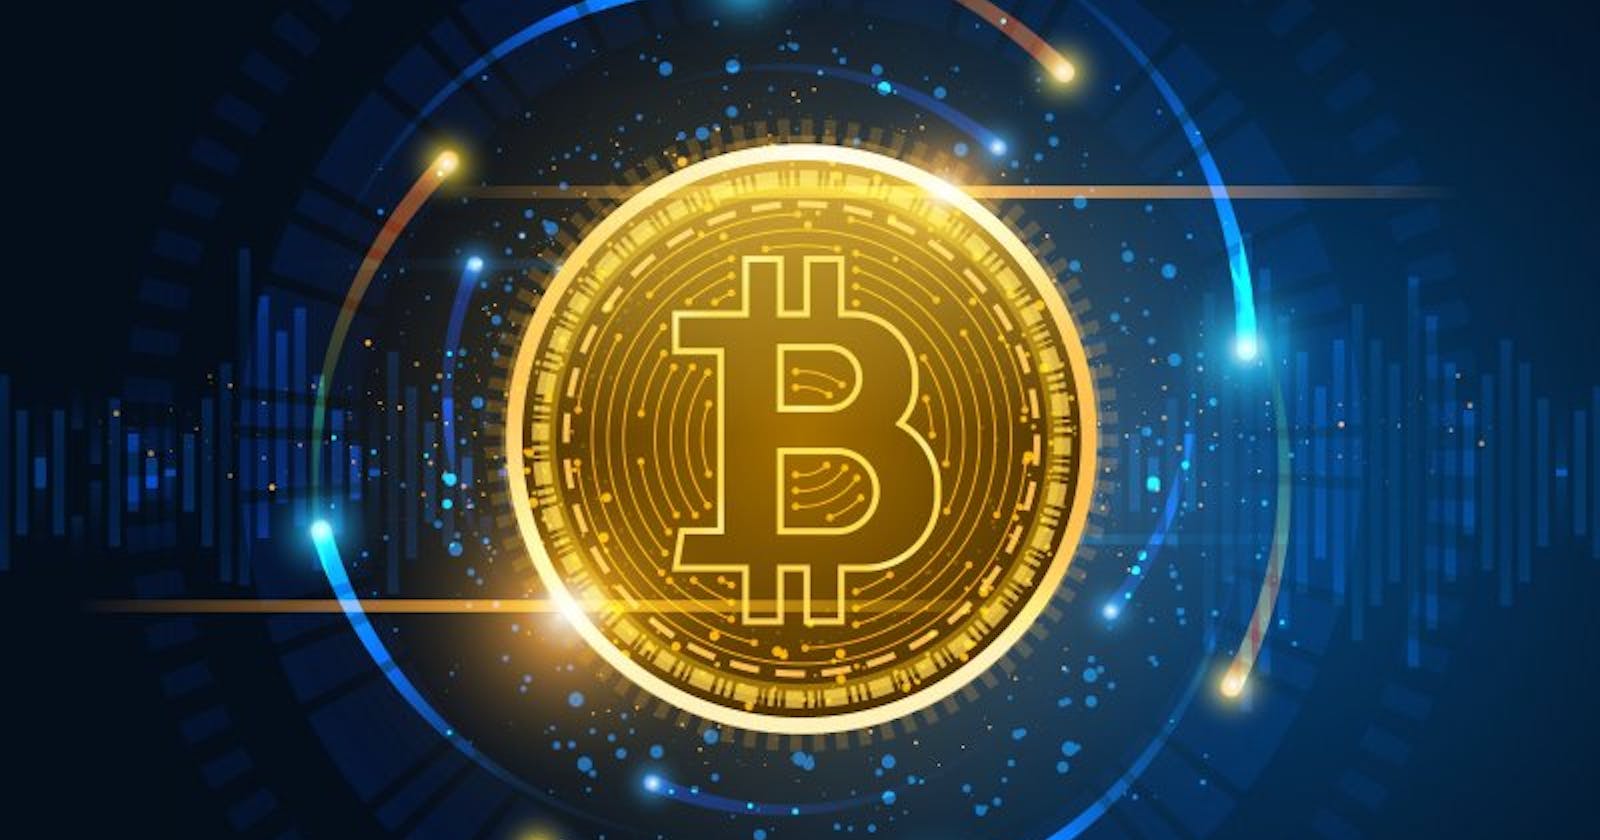 What Is Bitcoin and What Makes It So Special?